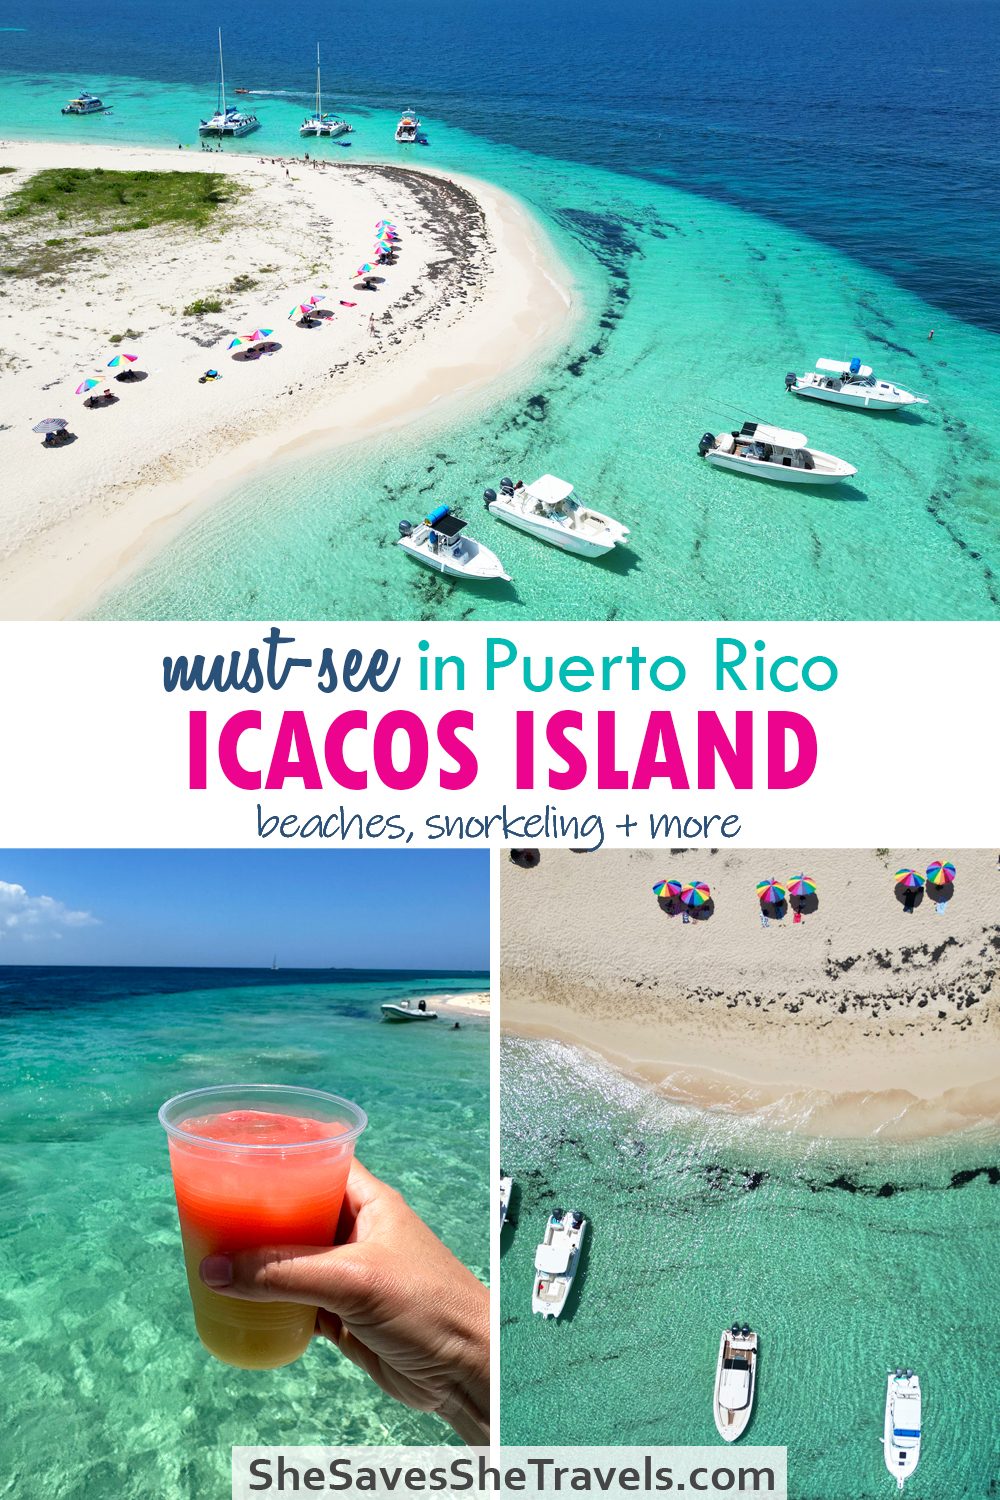 must-see in Puerto Rico Icacos Island beaches snorkeling and more with photos of beaches from above and hand holding drink